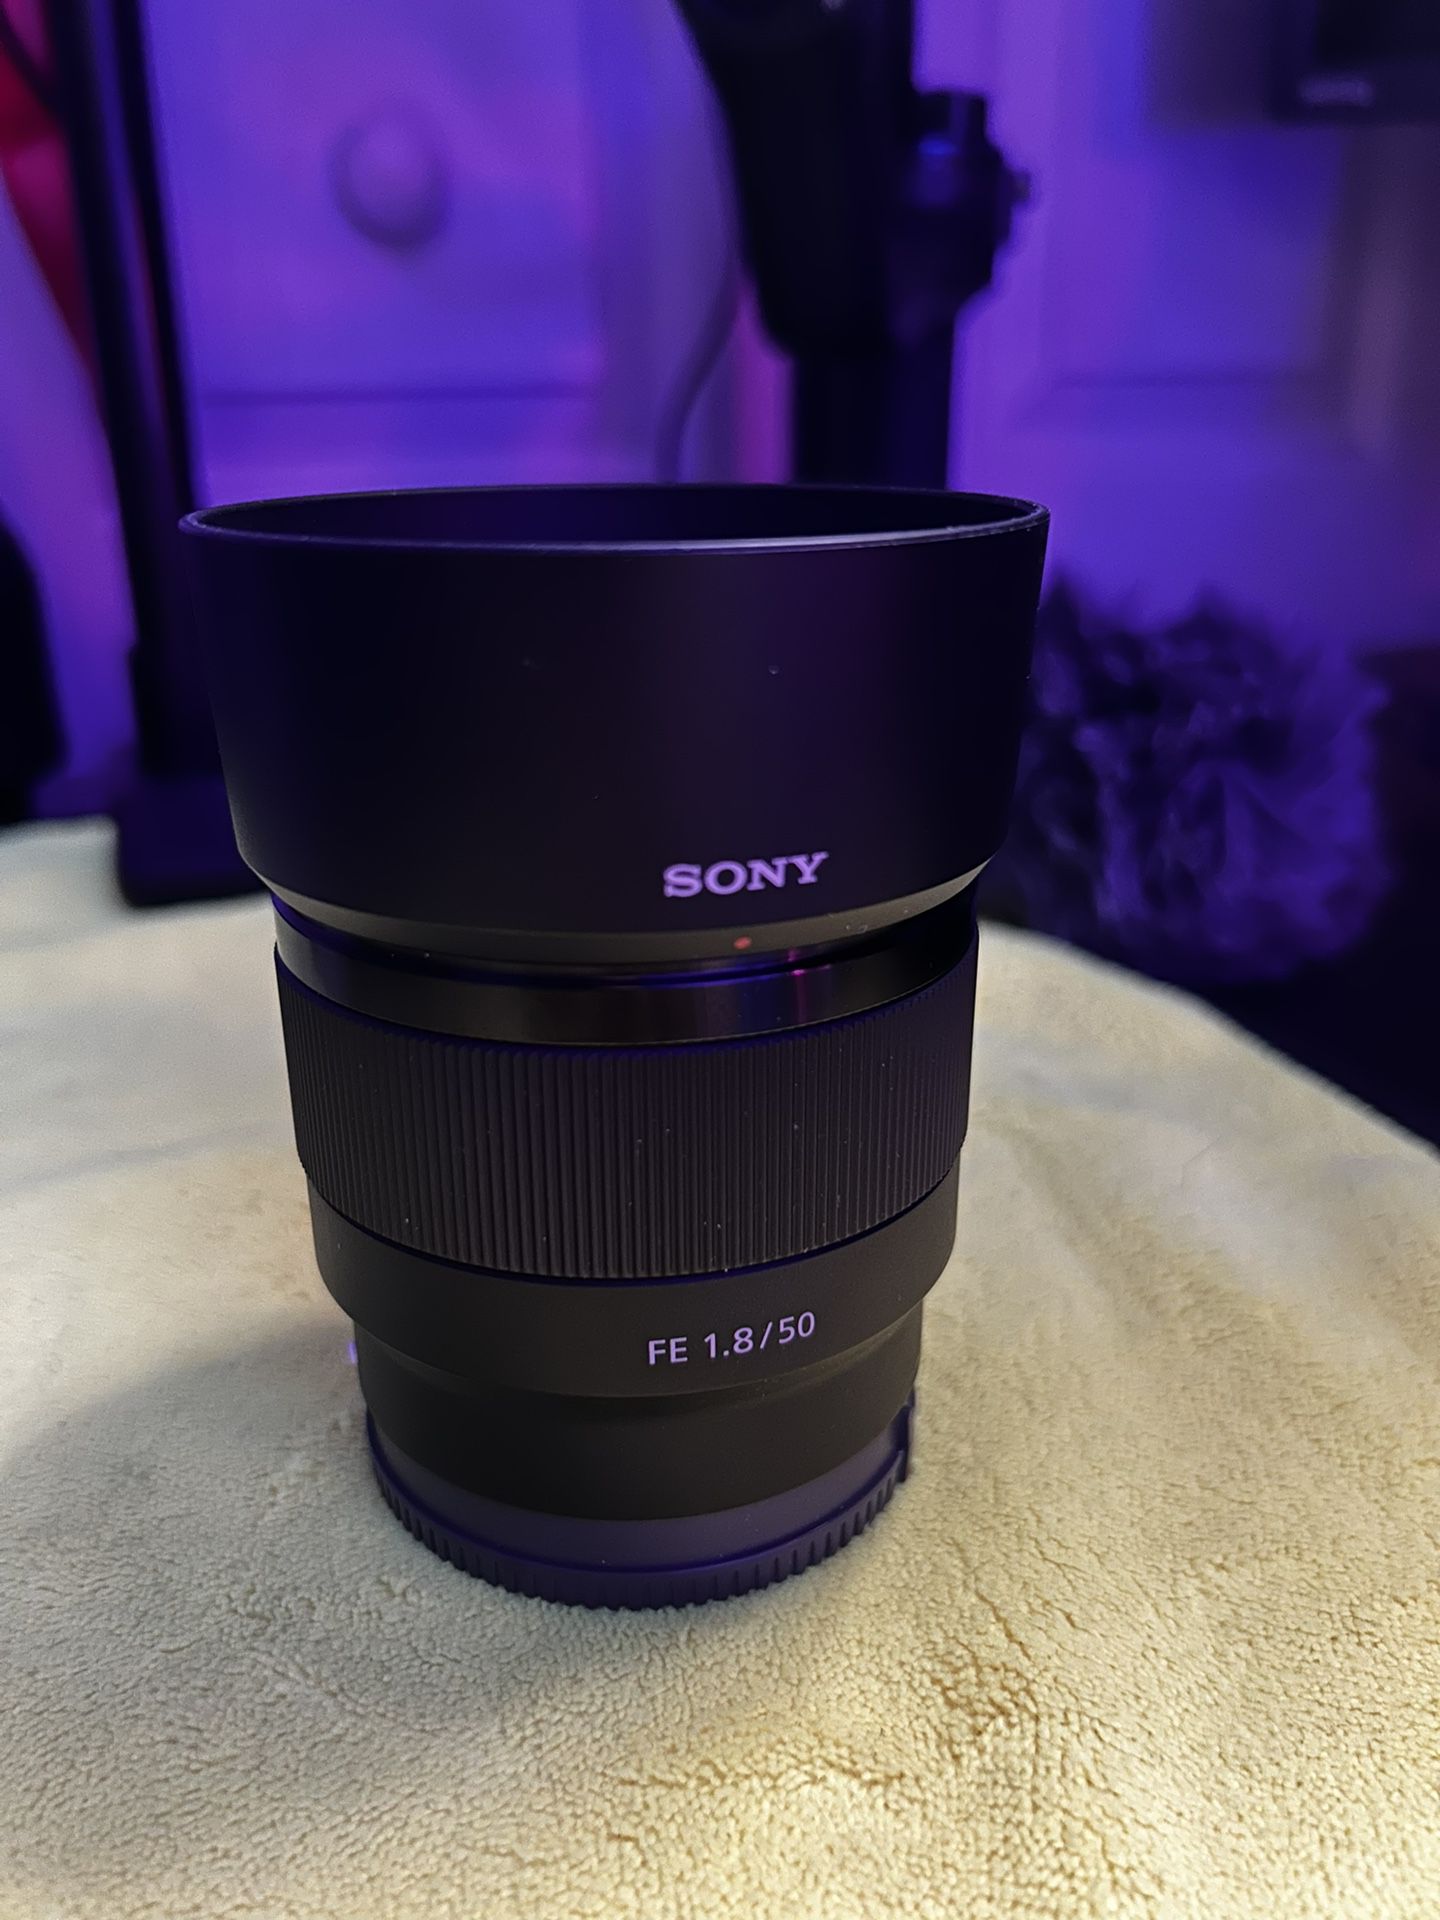 Sony 50mm f/1.8 Lens - “Nifty Fifty”